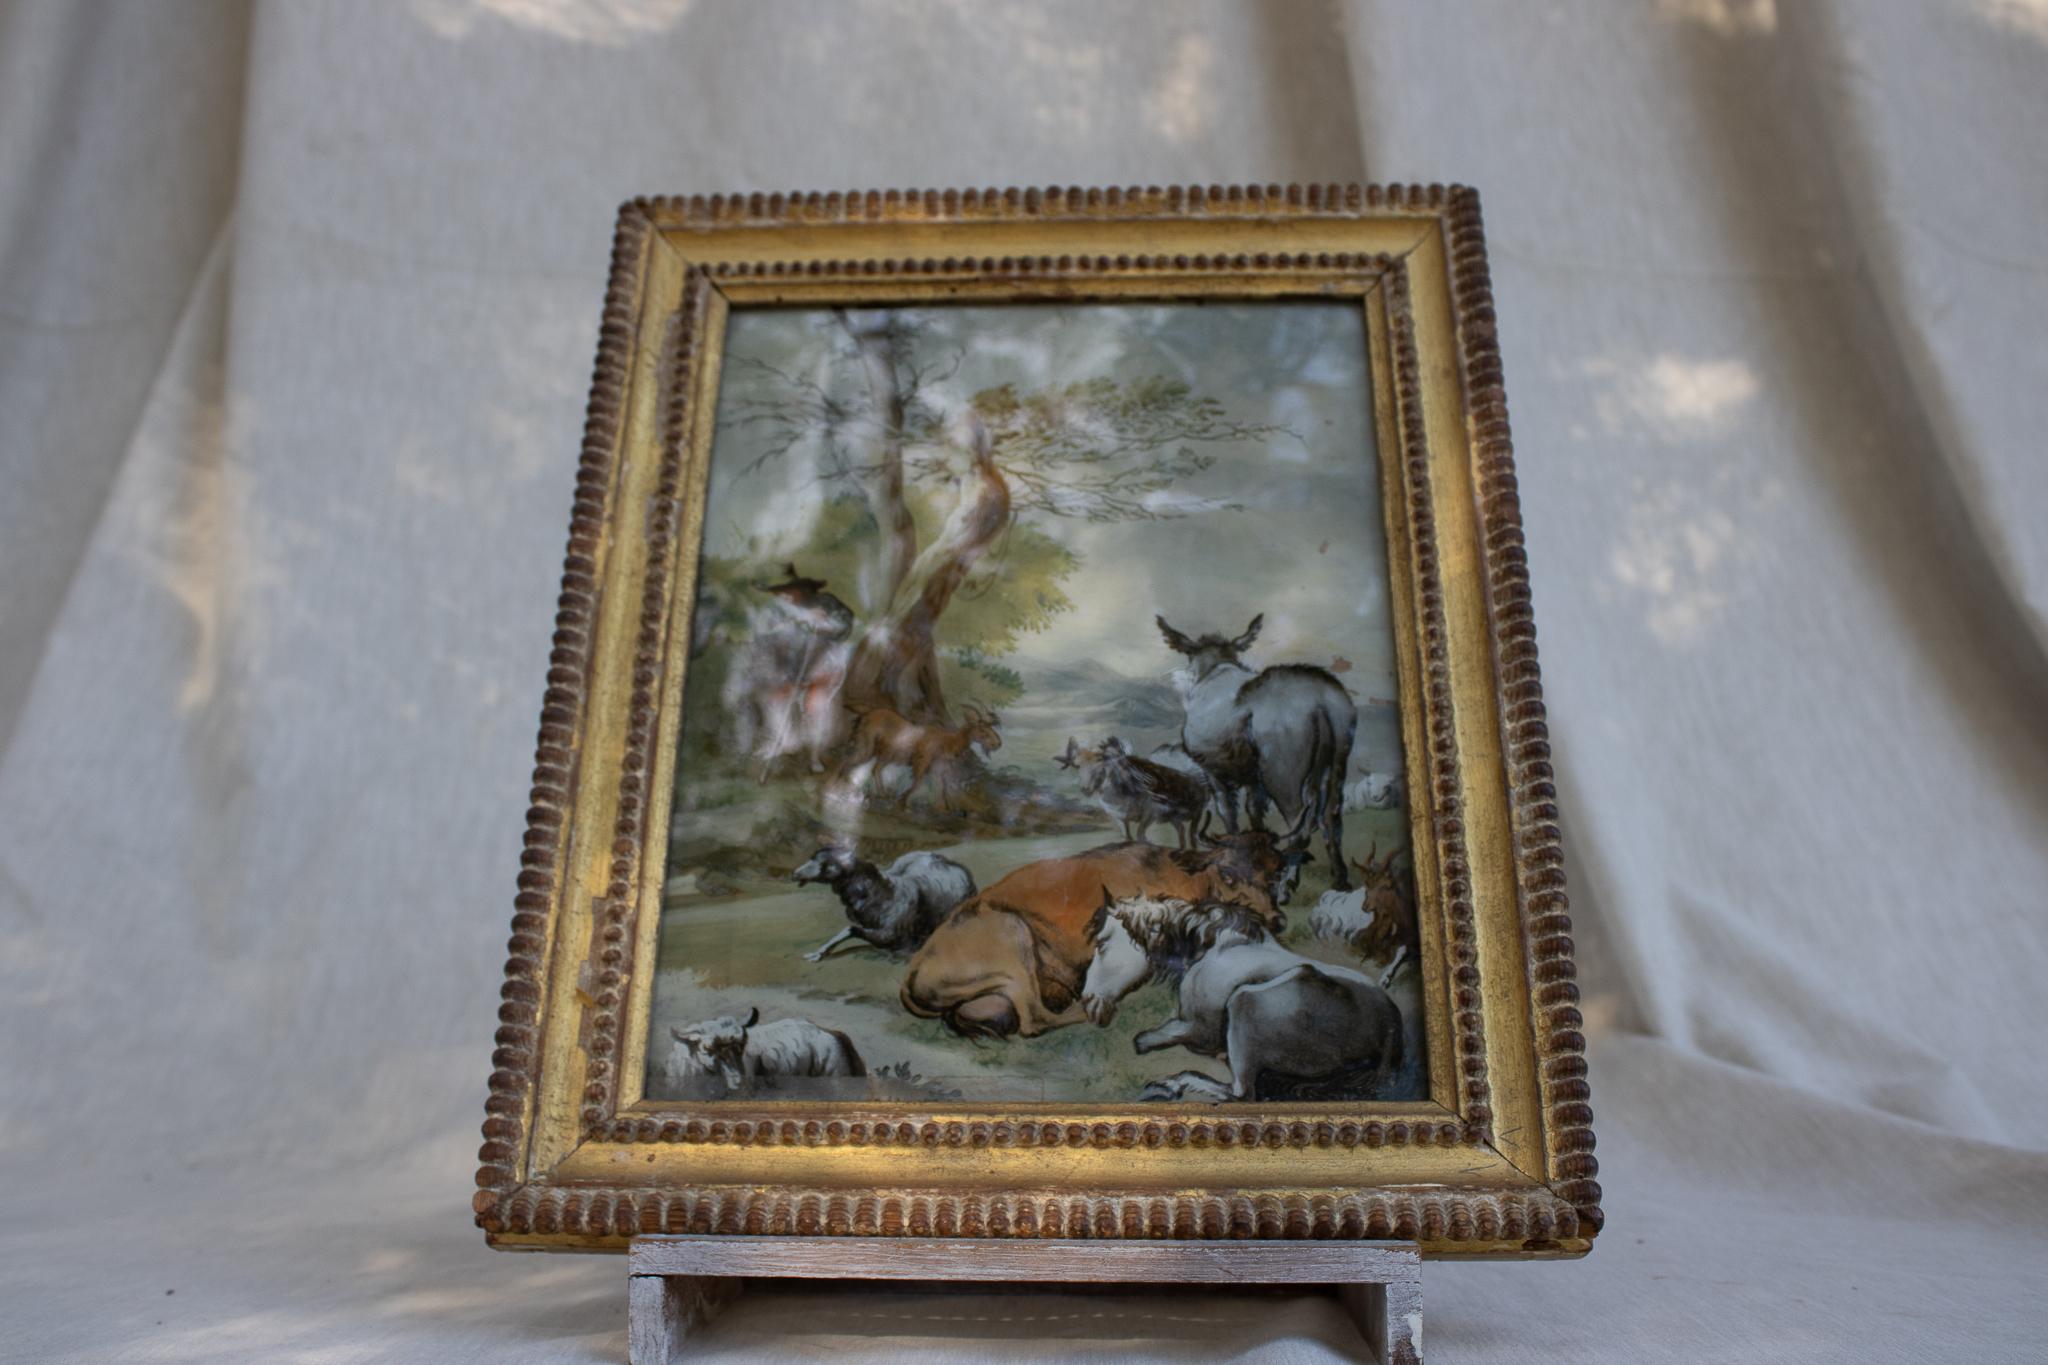 Shepherds and pastoral scenes have been popular subjects in art for centuries, appearing in various styles and mediums, including paintings, drawings, and sculptures.

Artists often depicted pastoral landscapes with shepherds tending to their